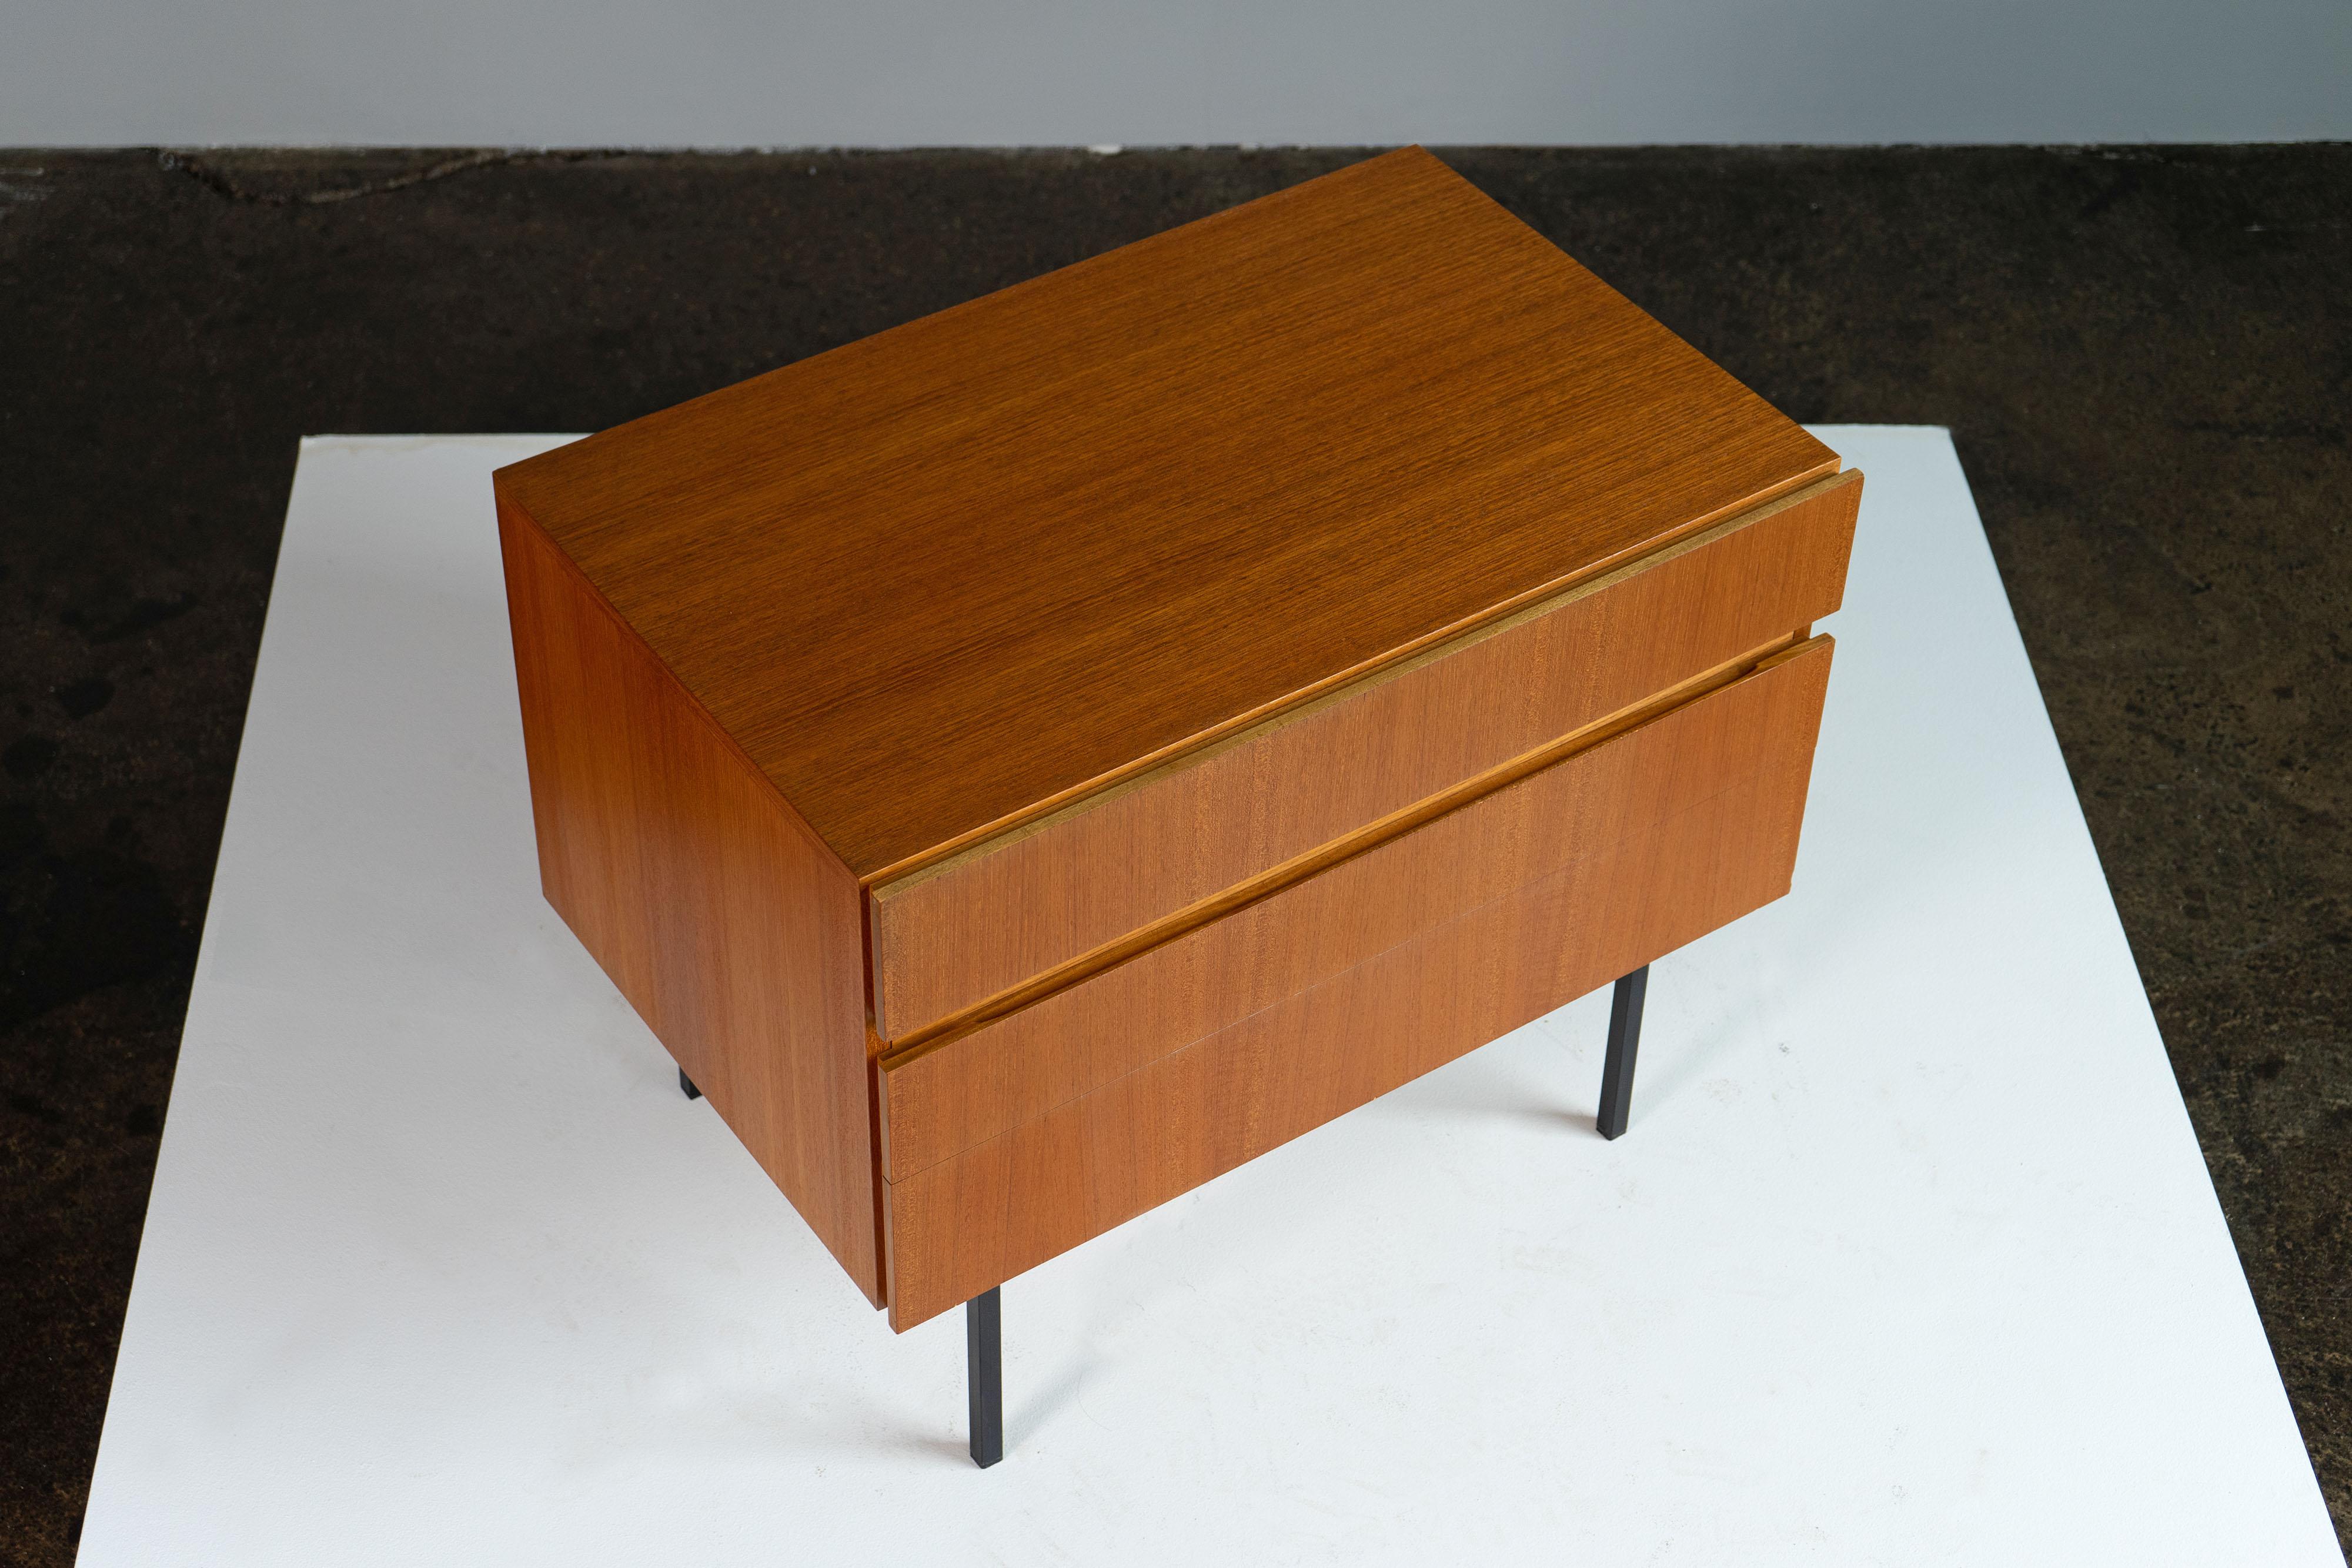 20th Century Mid-Century Chest of Drawers by Dieter Waeckerlin for Behr, Teak, 1960s For Sale